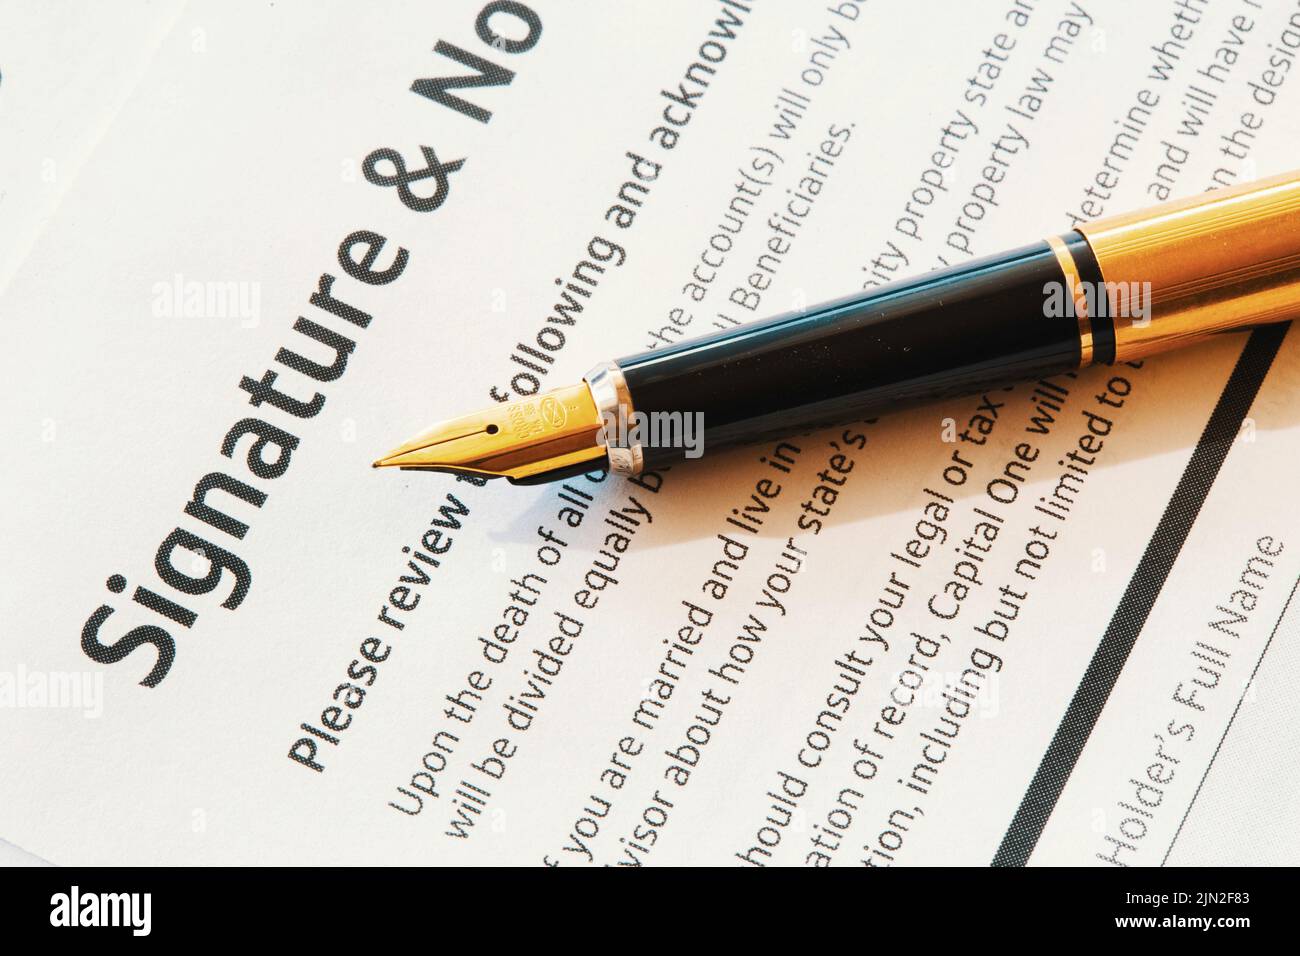 Close up of a vintage fountain pen on a legal document, United States Stock Photo